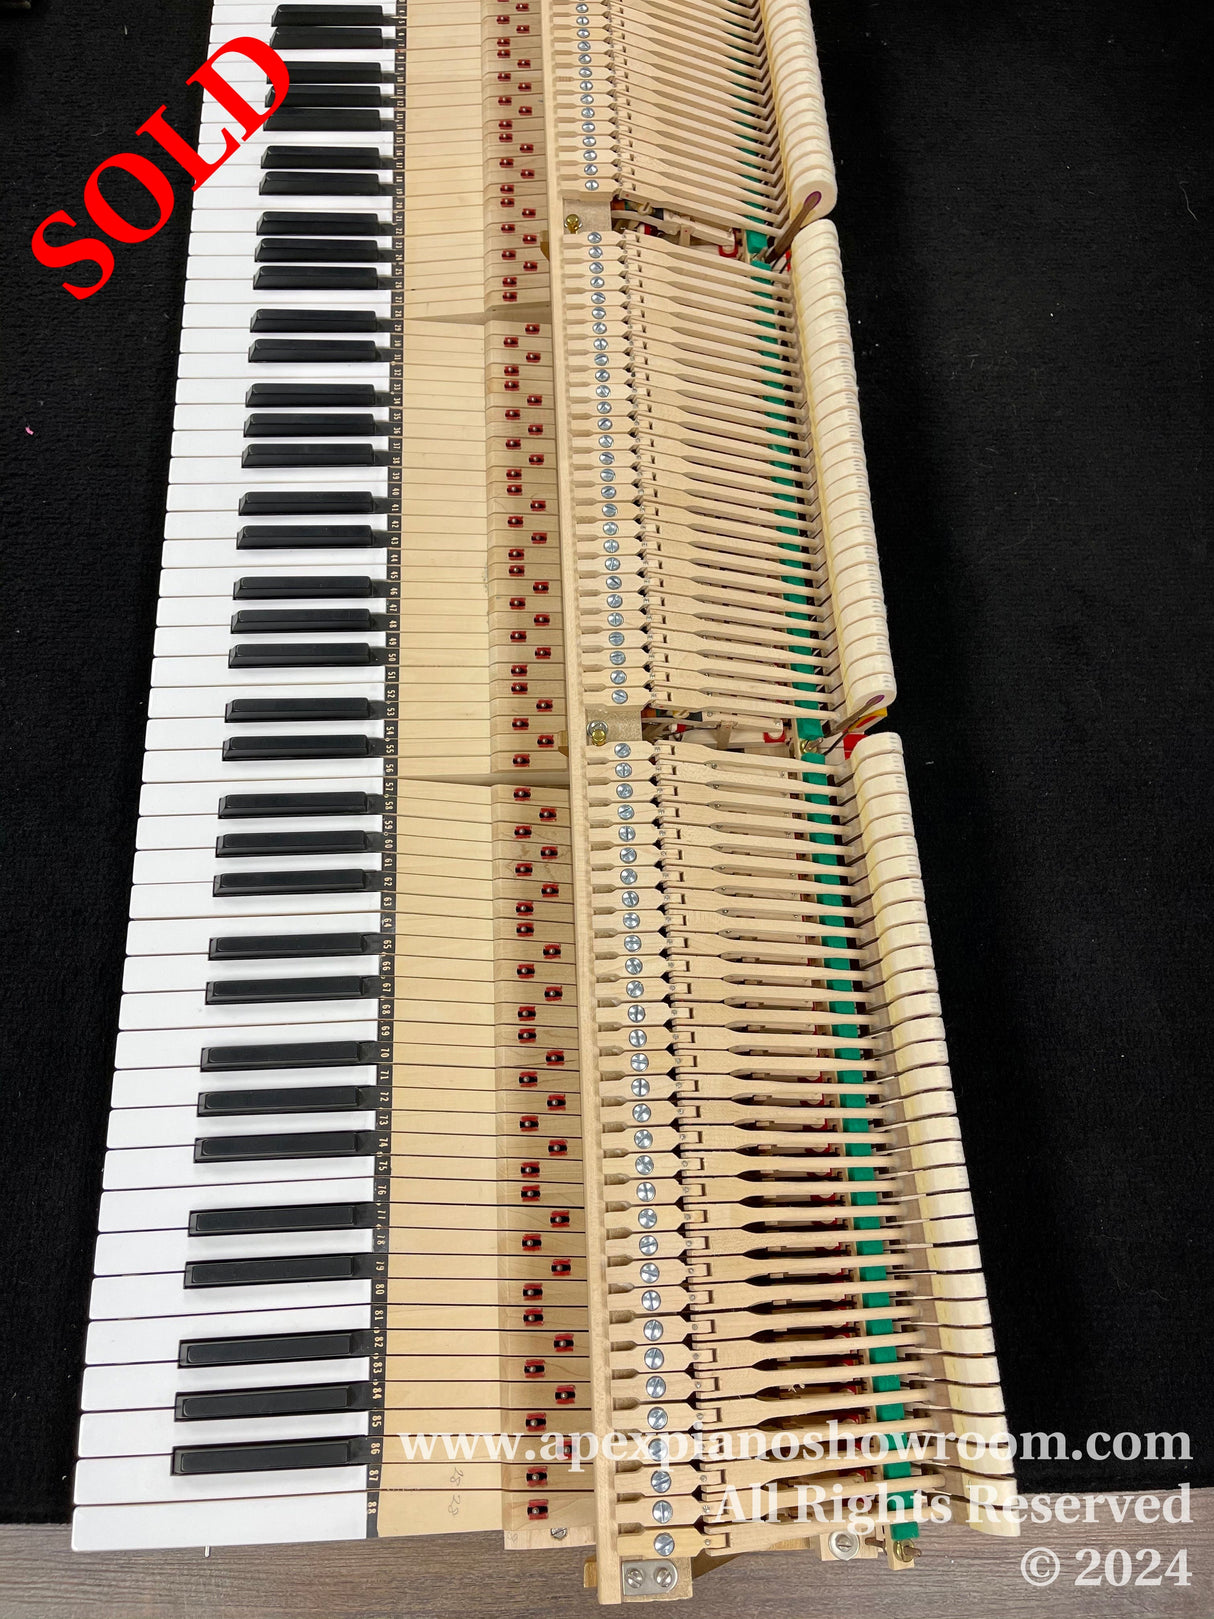 A close-up view of piano keys along with the internal hammer mechanism of a disassembled piano, showing the intricate array of hammers and dampers with felt, arrayed in a diagonal fashion across the image with a black background.